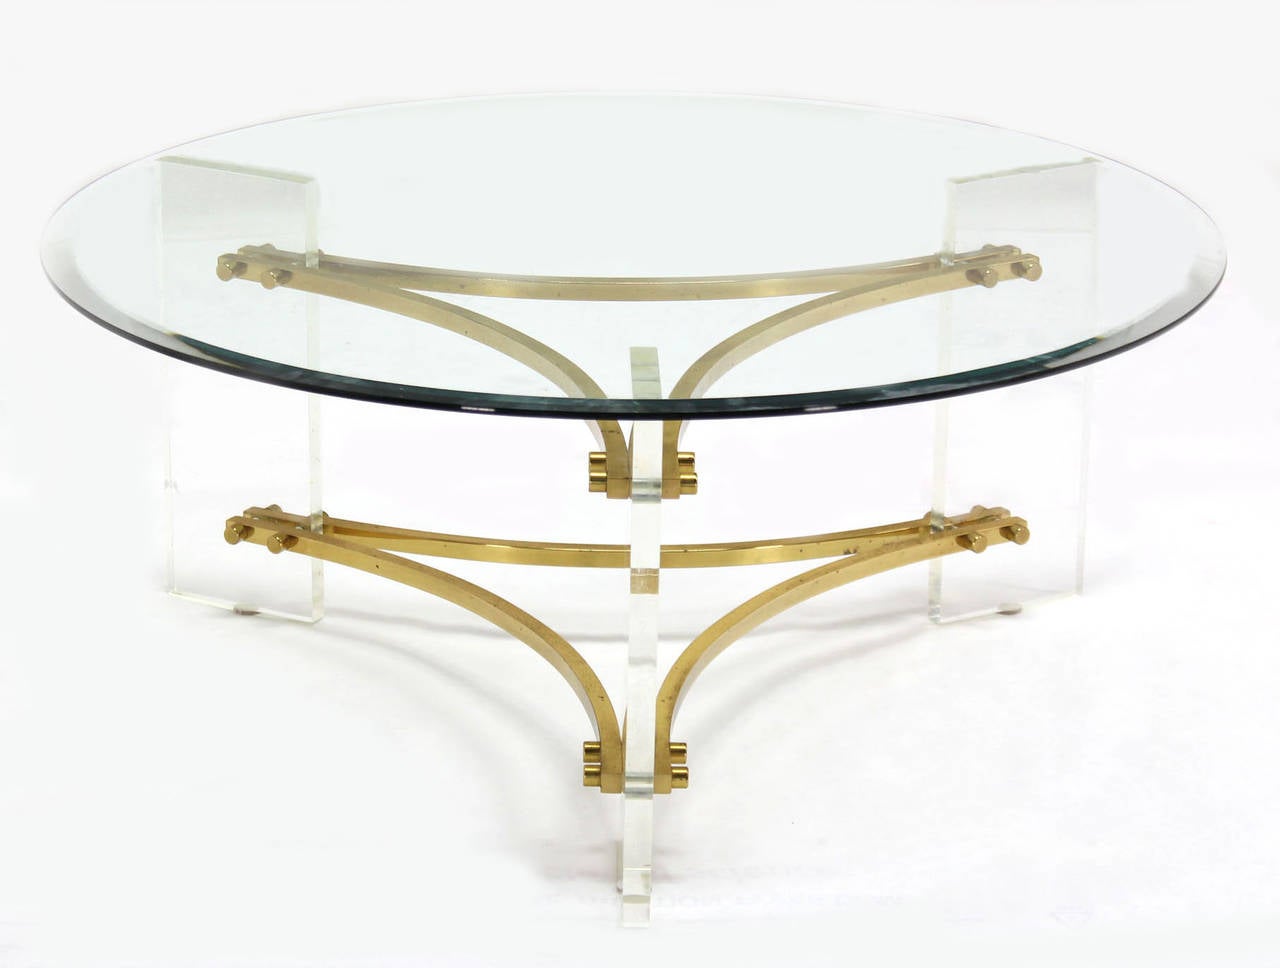 Very nice mid-century modern lucite and brass coffee table. Good vintage condition.